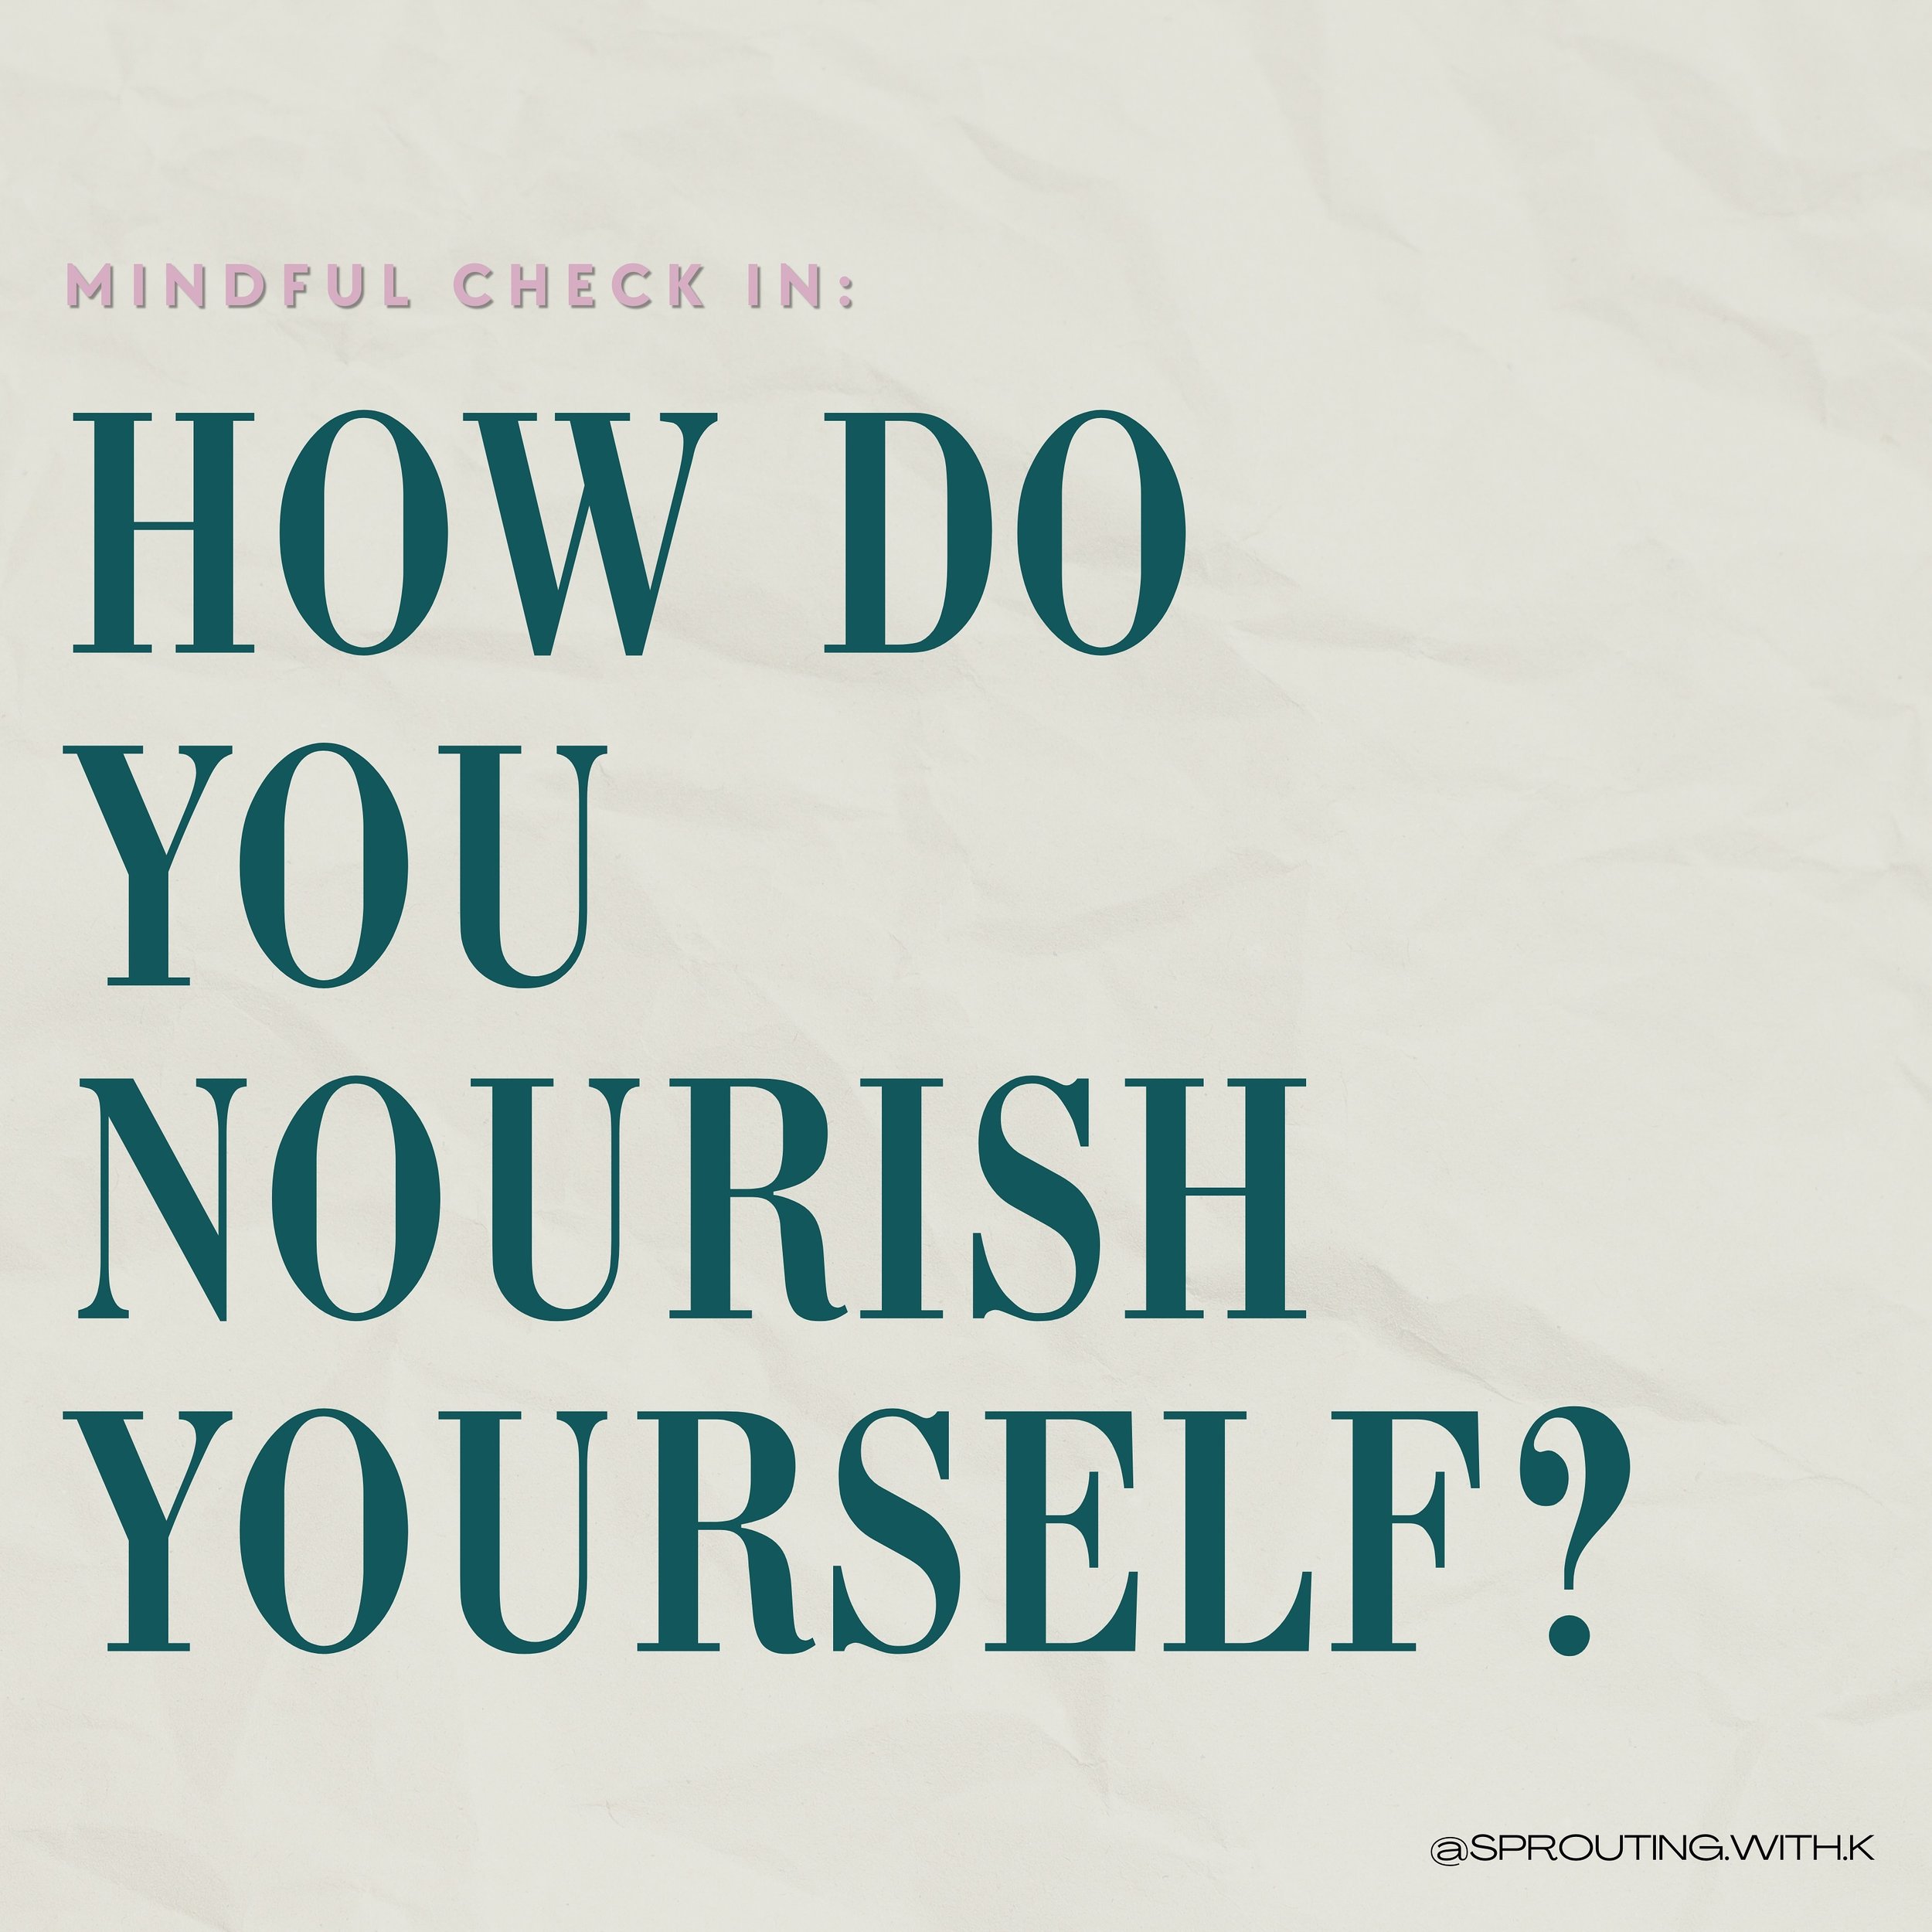 What does it mean to nourish ourselves? 

Whether it&rsquo;s eating fueling foods, listening to music, laughing with friends, or challenging ourselves to do hard things. Being intentional about the small present everyday choices that contribute to ou